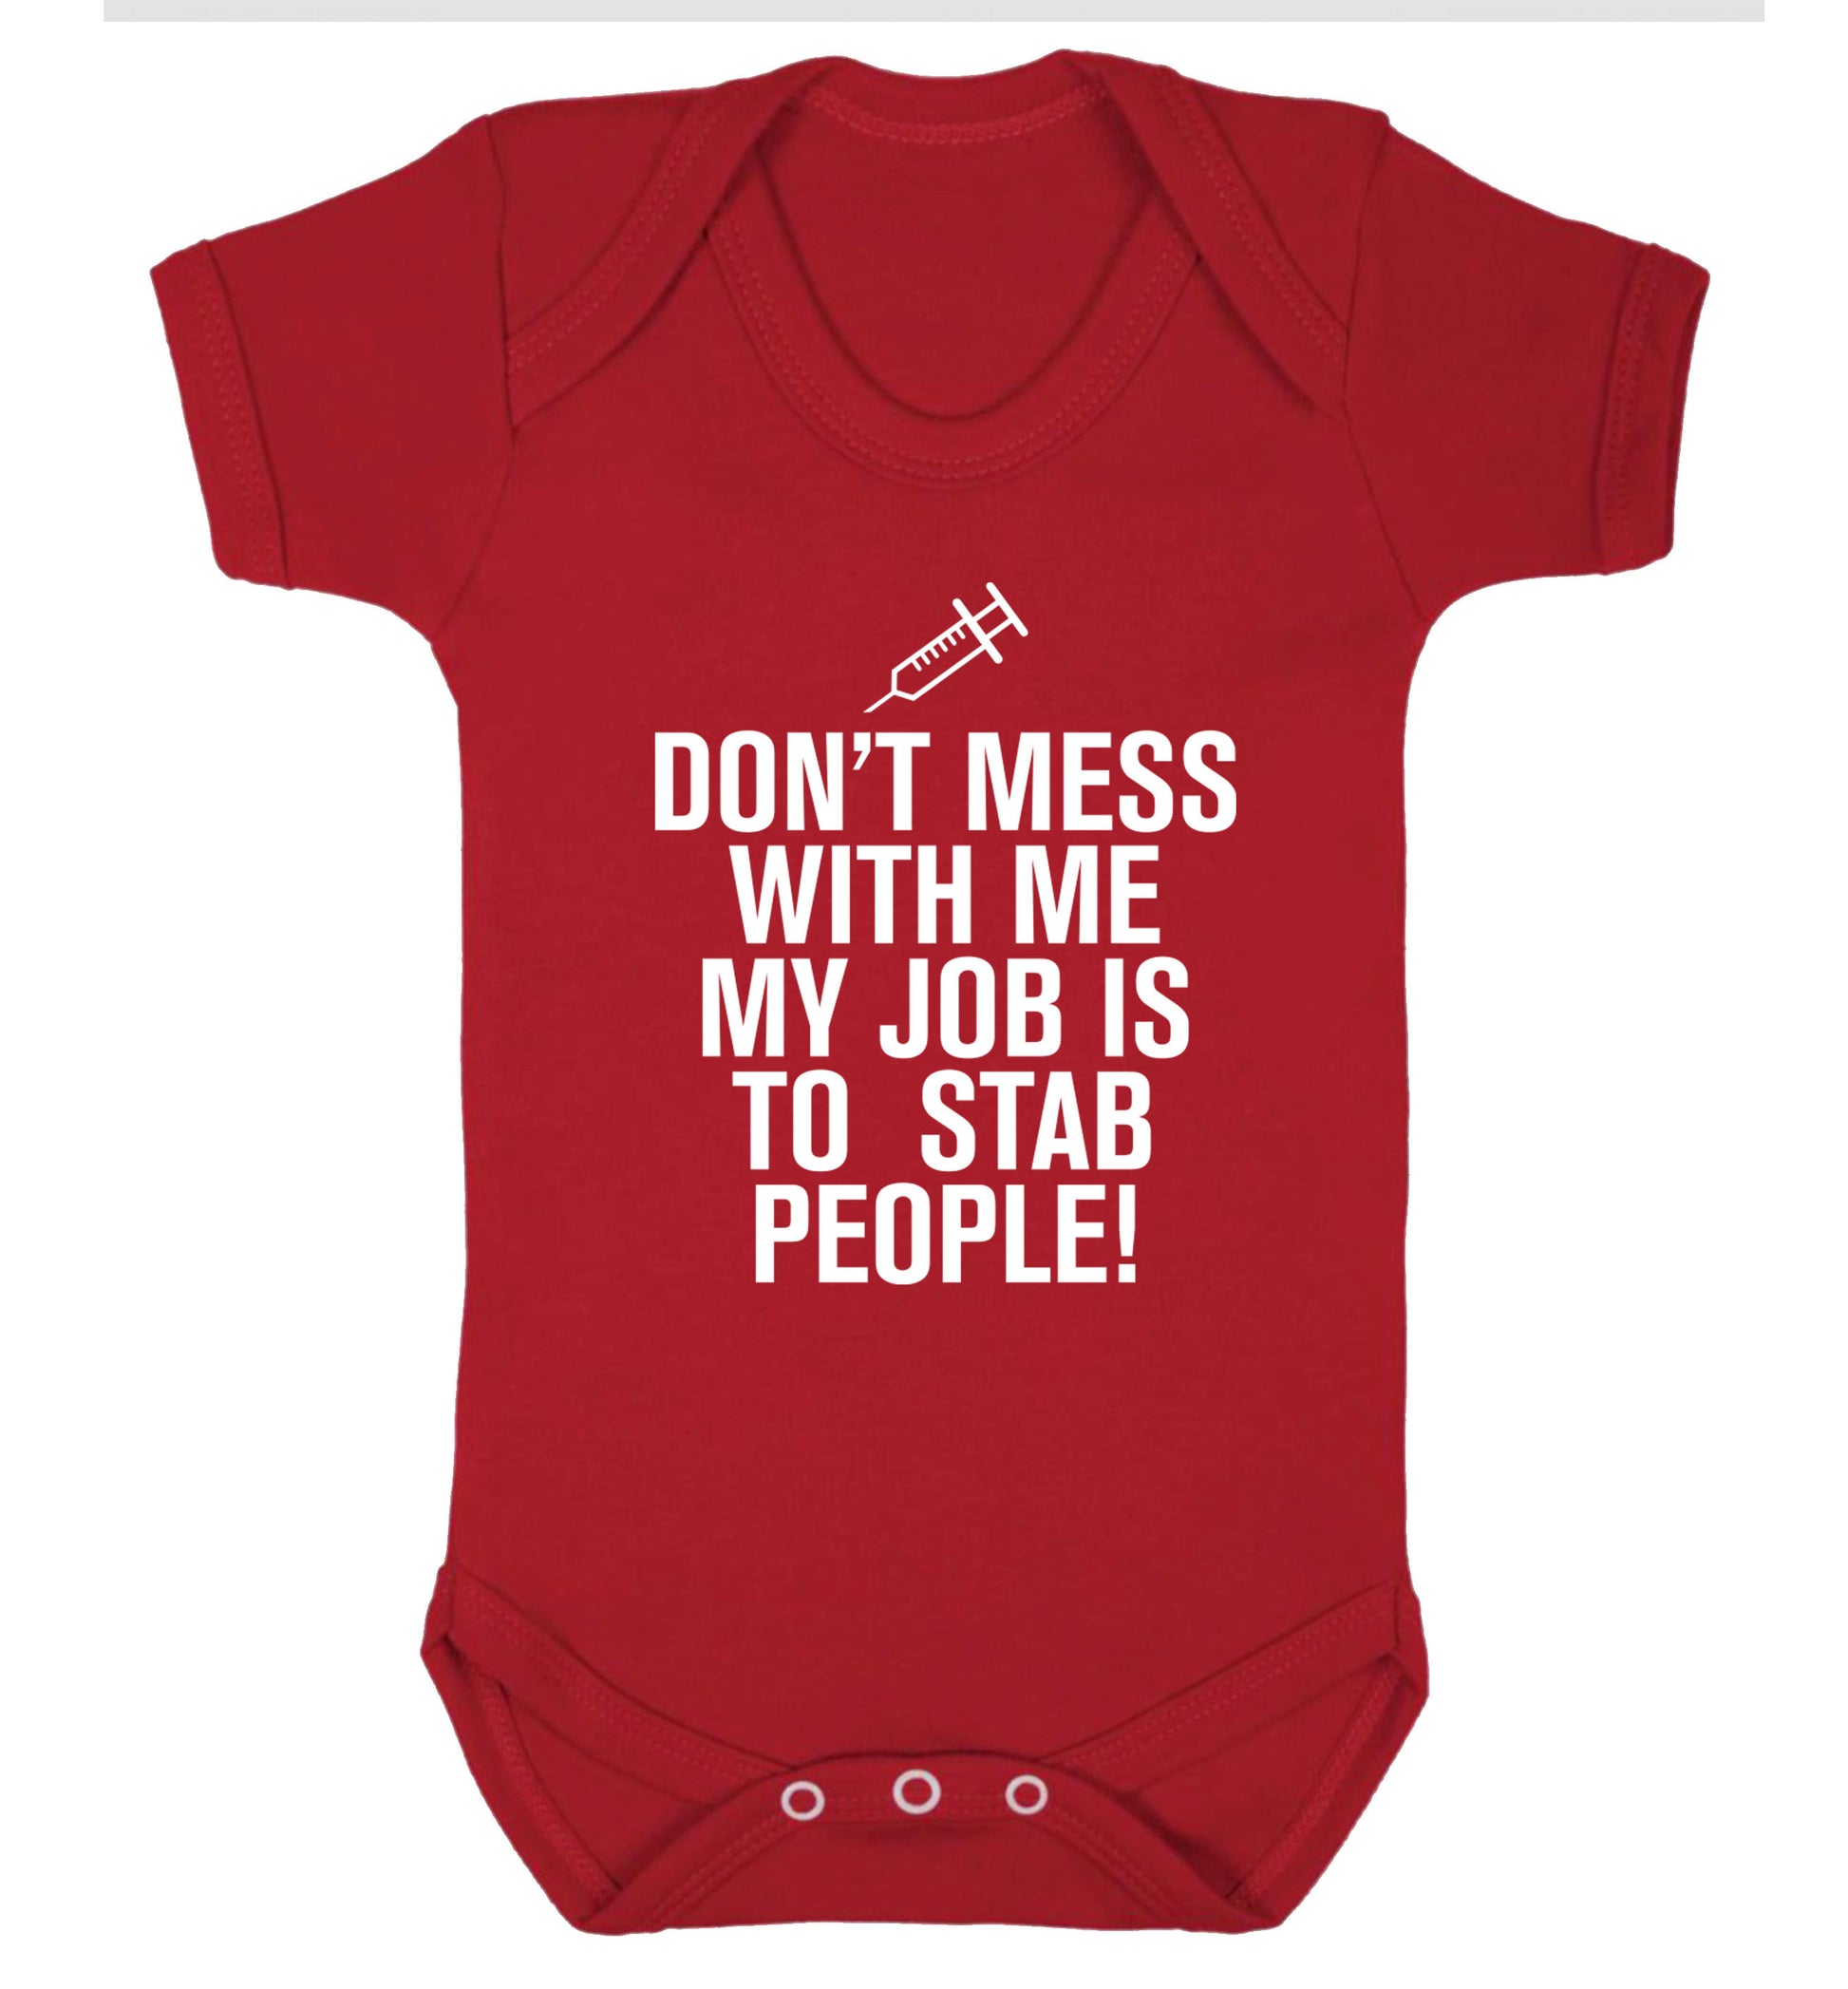 Don't mess with me my job is to stab people! Baby Vest red 18-24 months